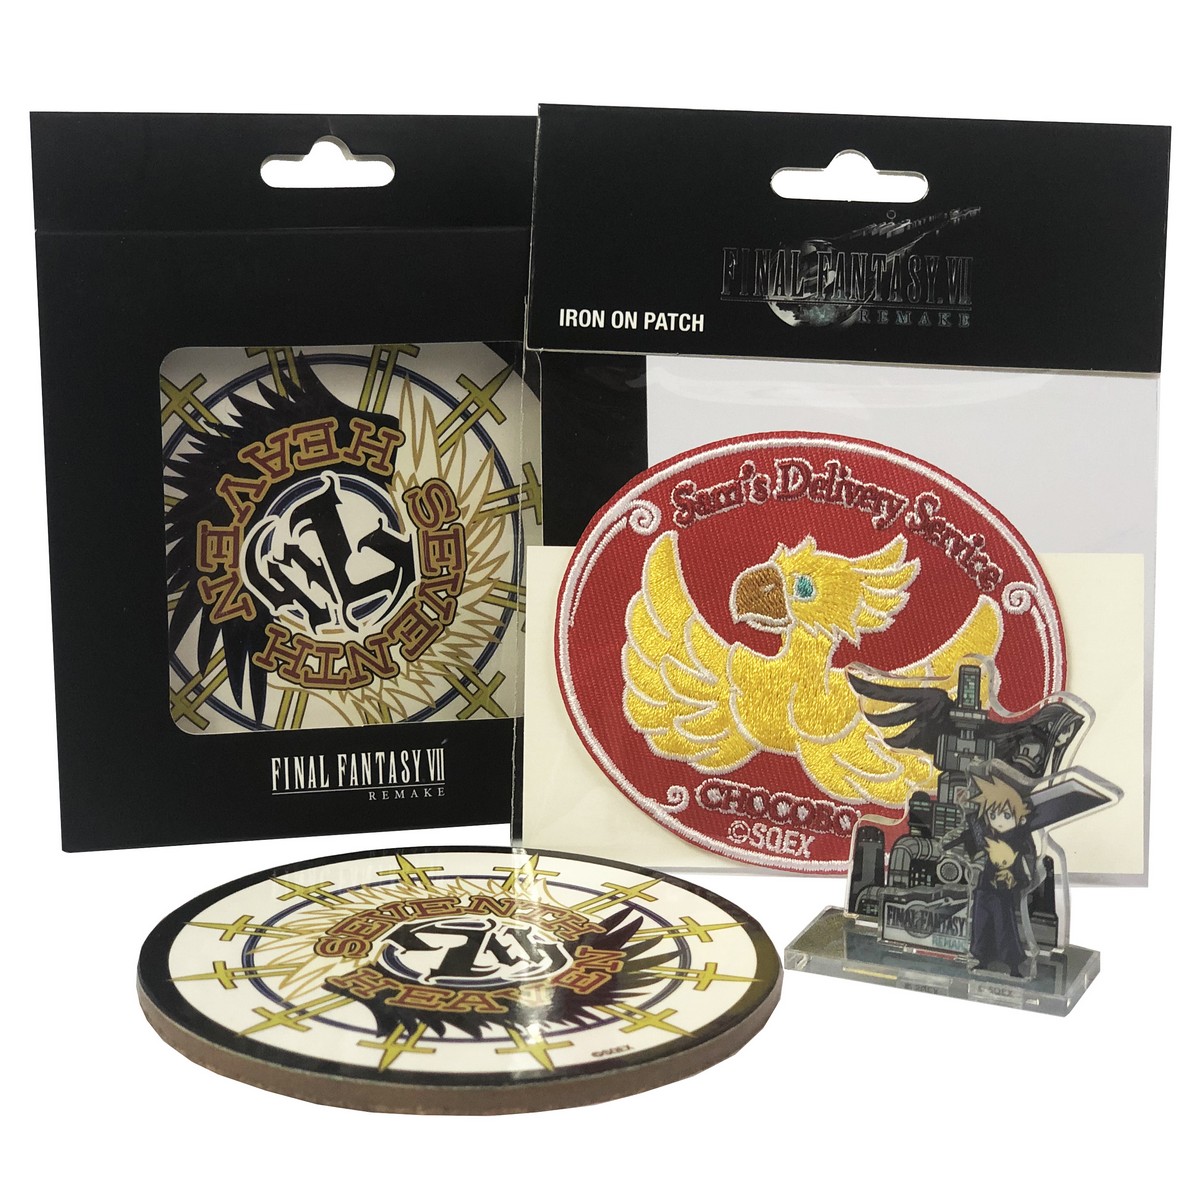 Final Fantasy VII Remake - Mini Acrylic Stand, Coasters 4-Pack and Iron on Patch